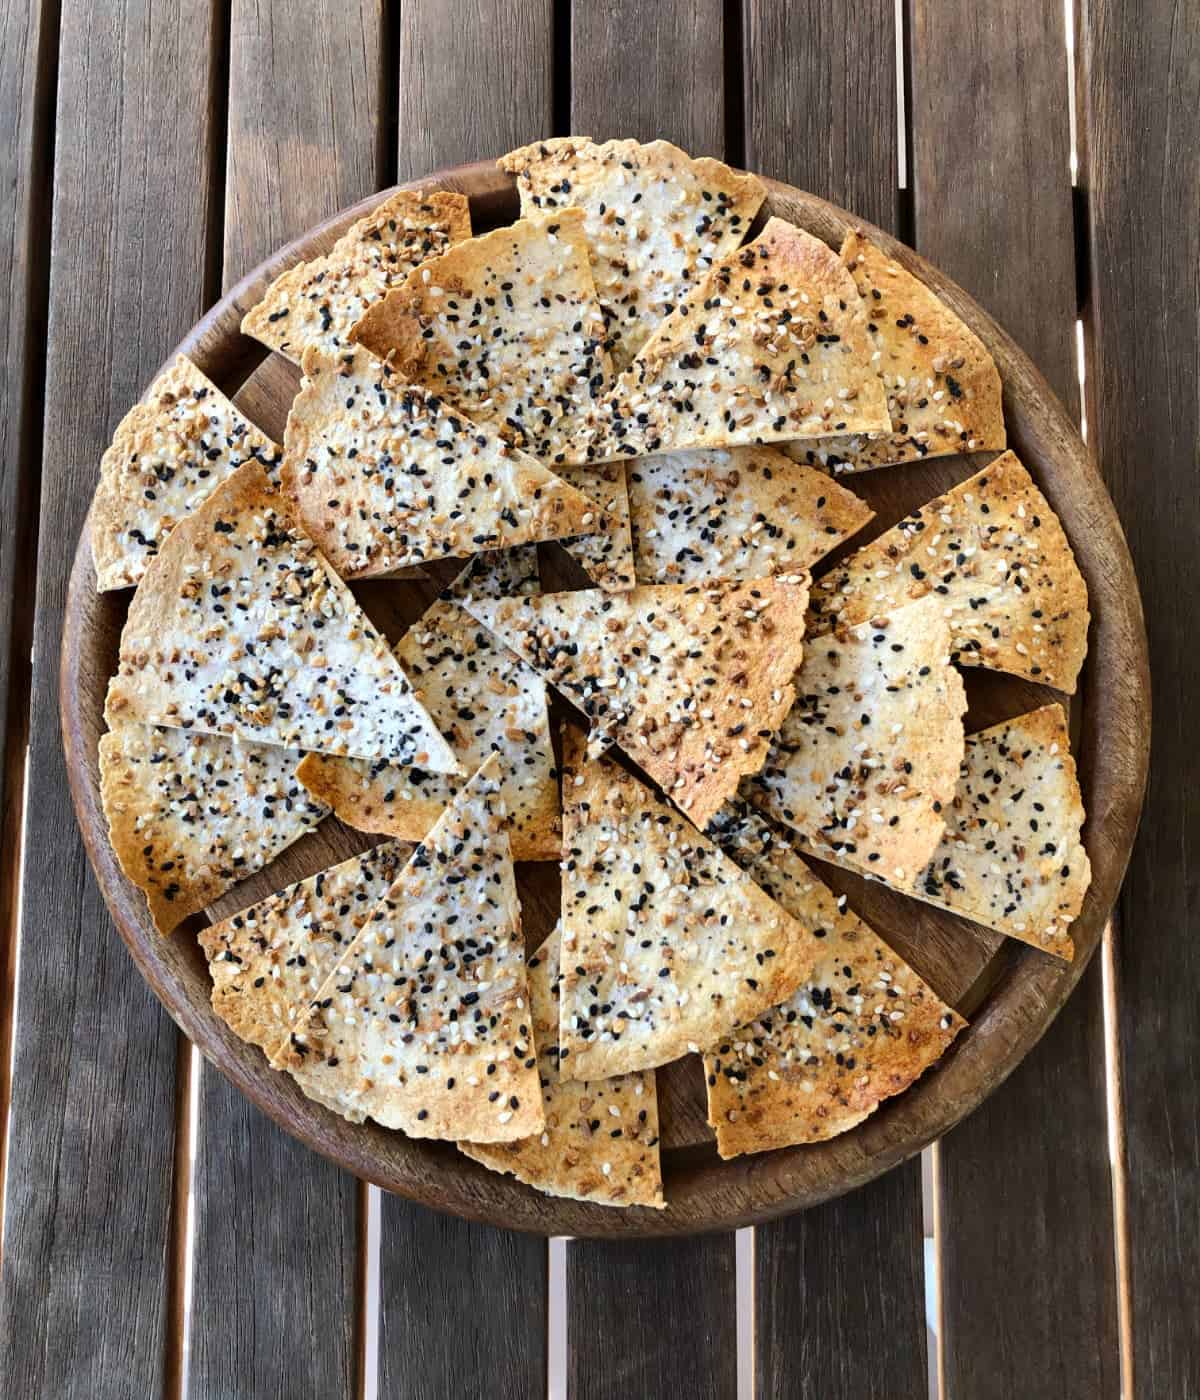 Everything Bagel Seasoned Tortilla Chips on wooden table.